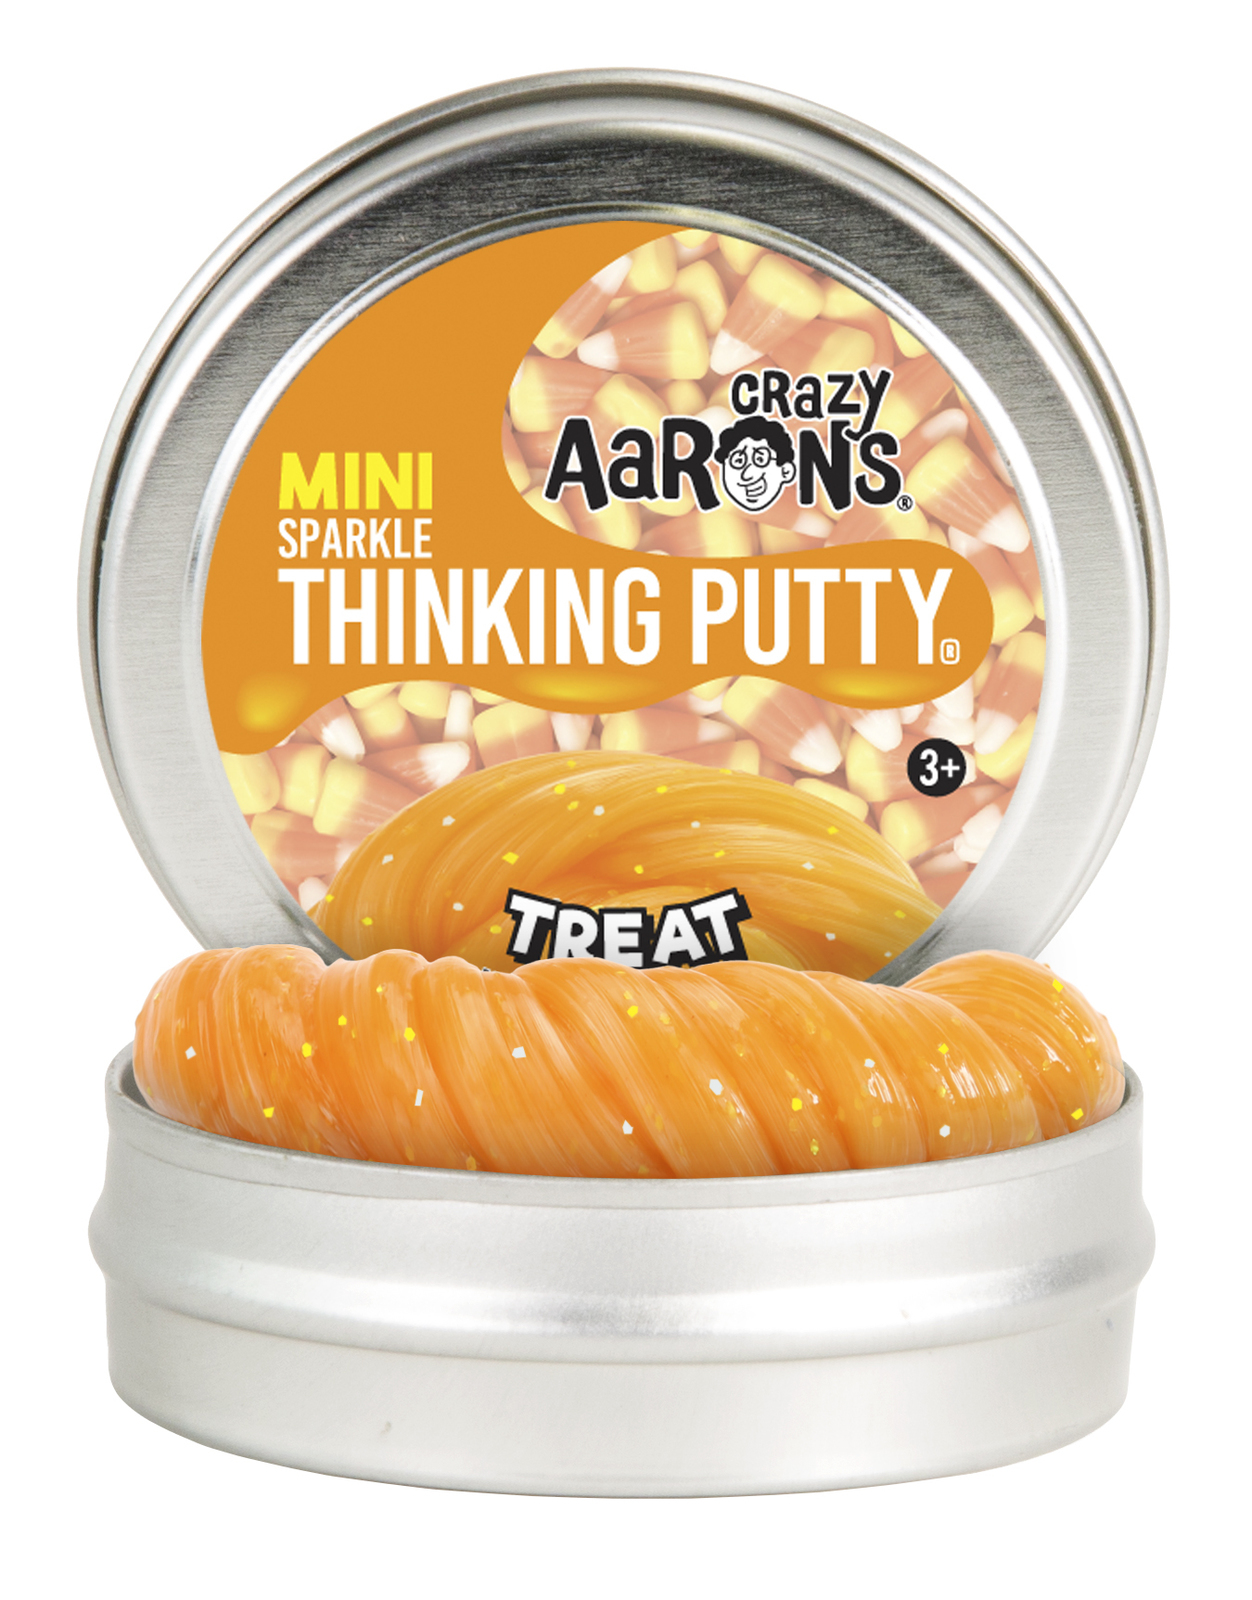 Image result for treat thinking putty